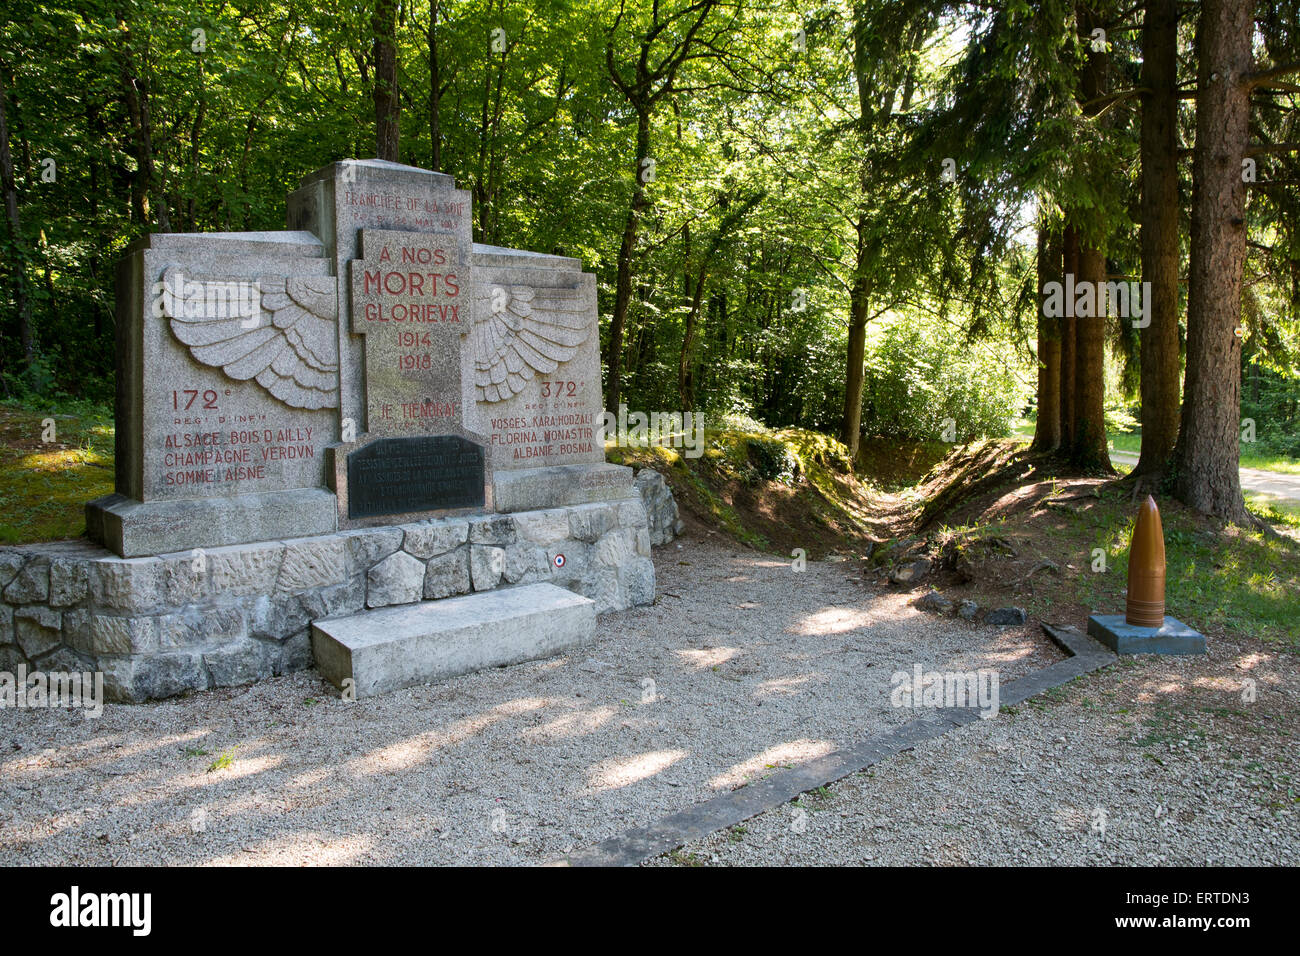 French battlefield WW1 war memorial in the 'Trench of Thirst,' Ailly Wood, St Mihiel salient, Lorraine, France Stock Photo